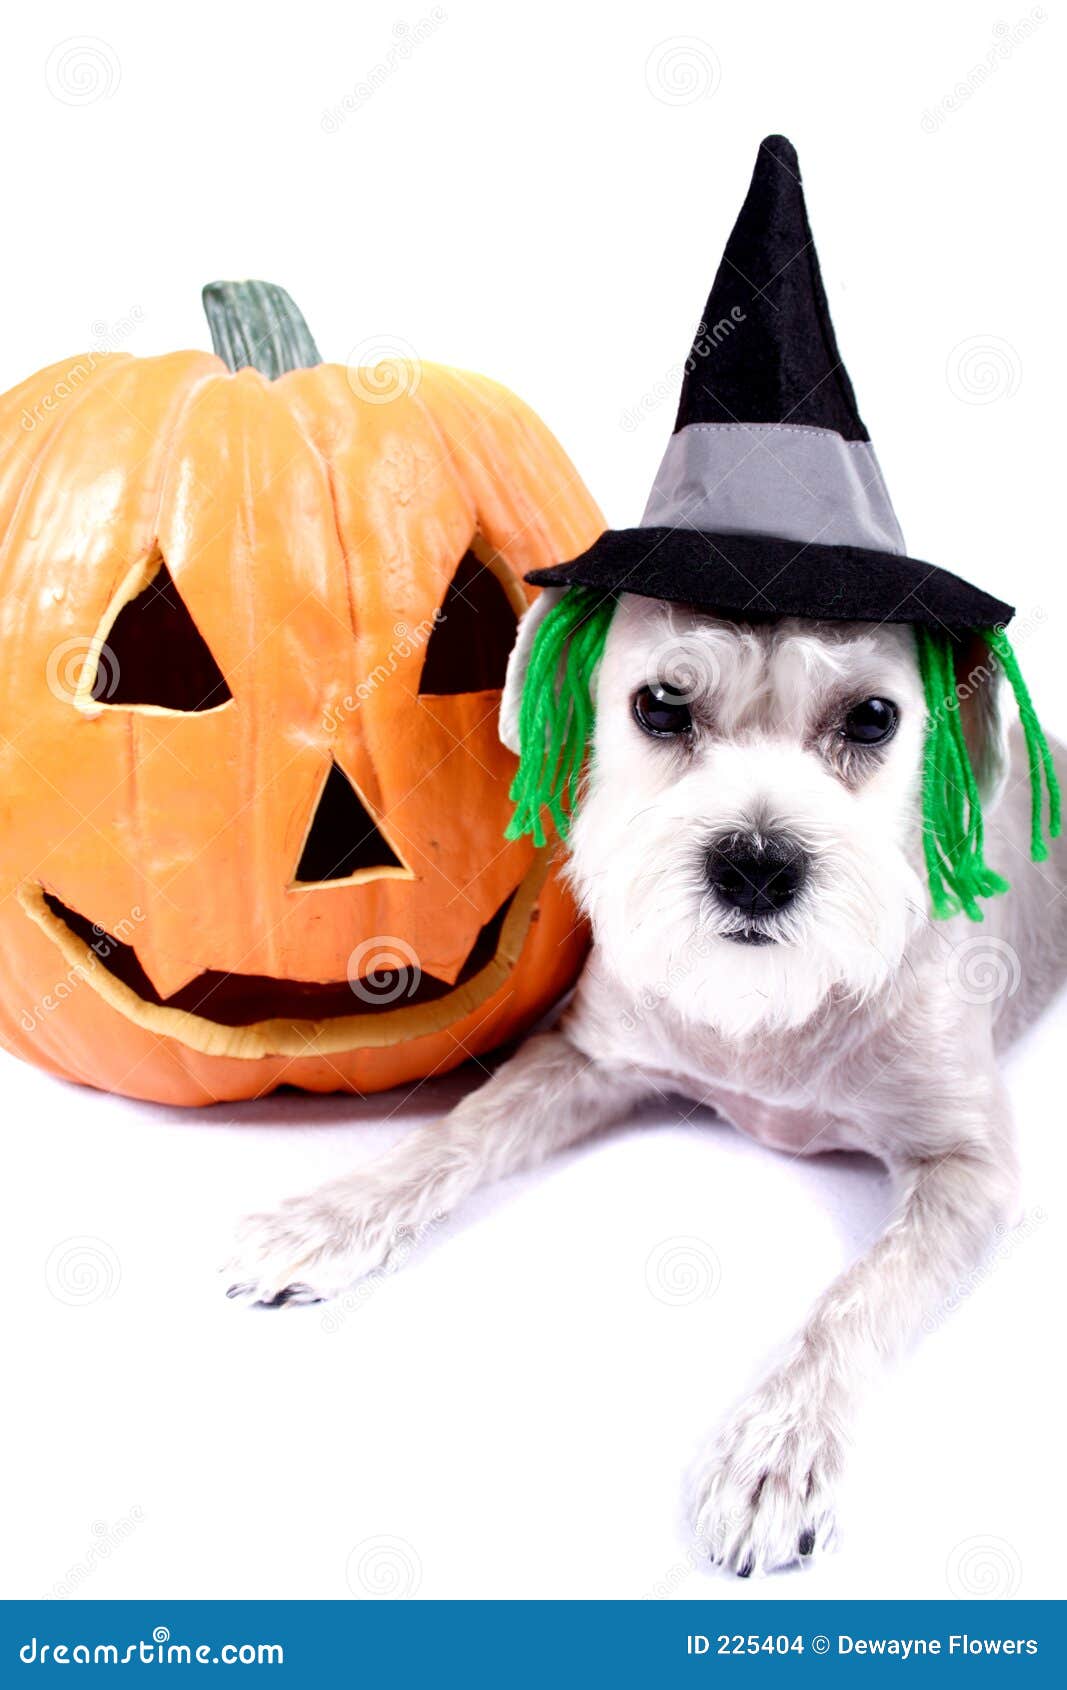 Two Small Dogs Dressed Up In Costumes For Halloween Background Picture Of  Dogs In Costumes Background Image And Wallpaper for Free Download